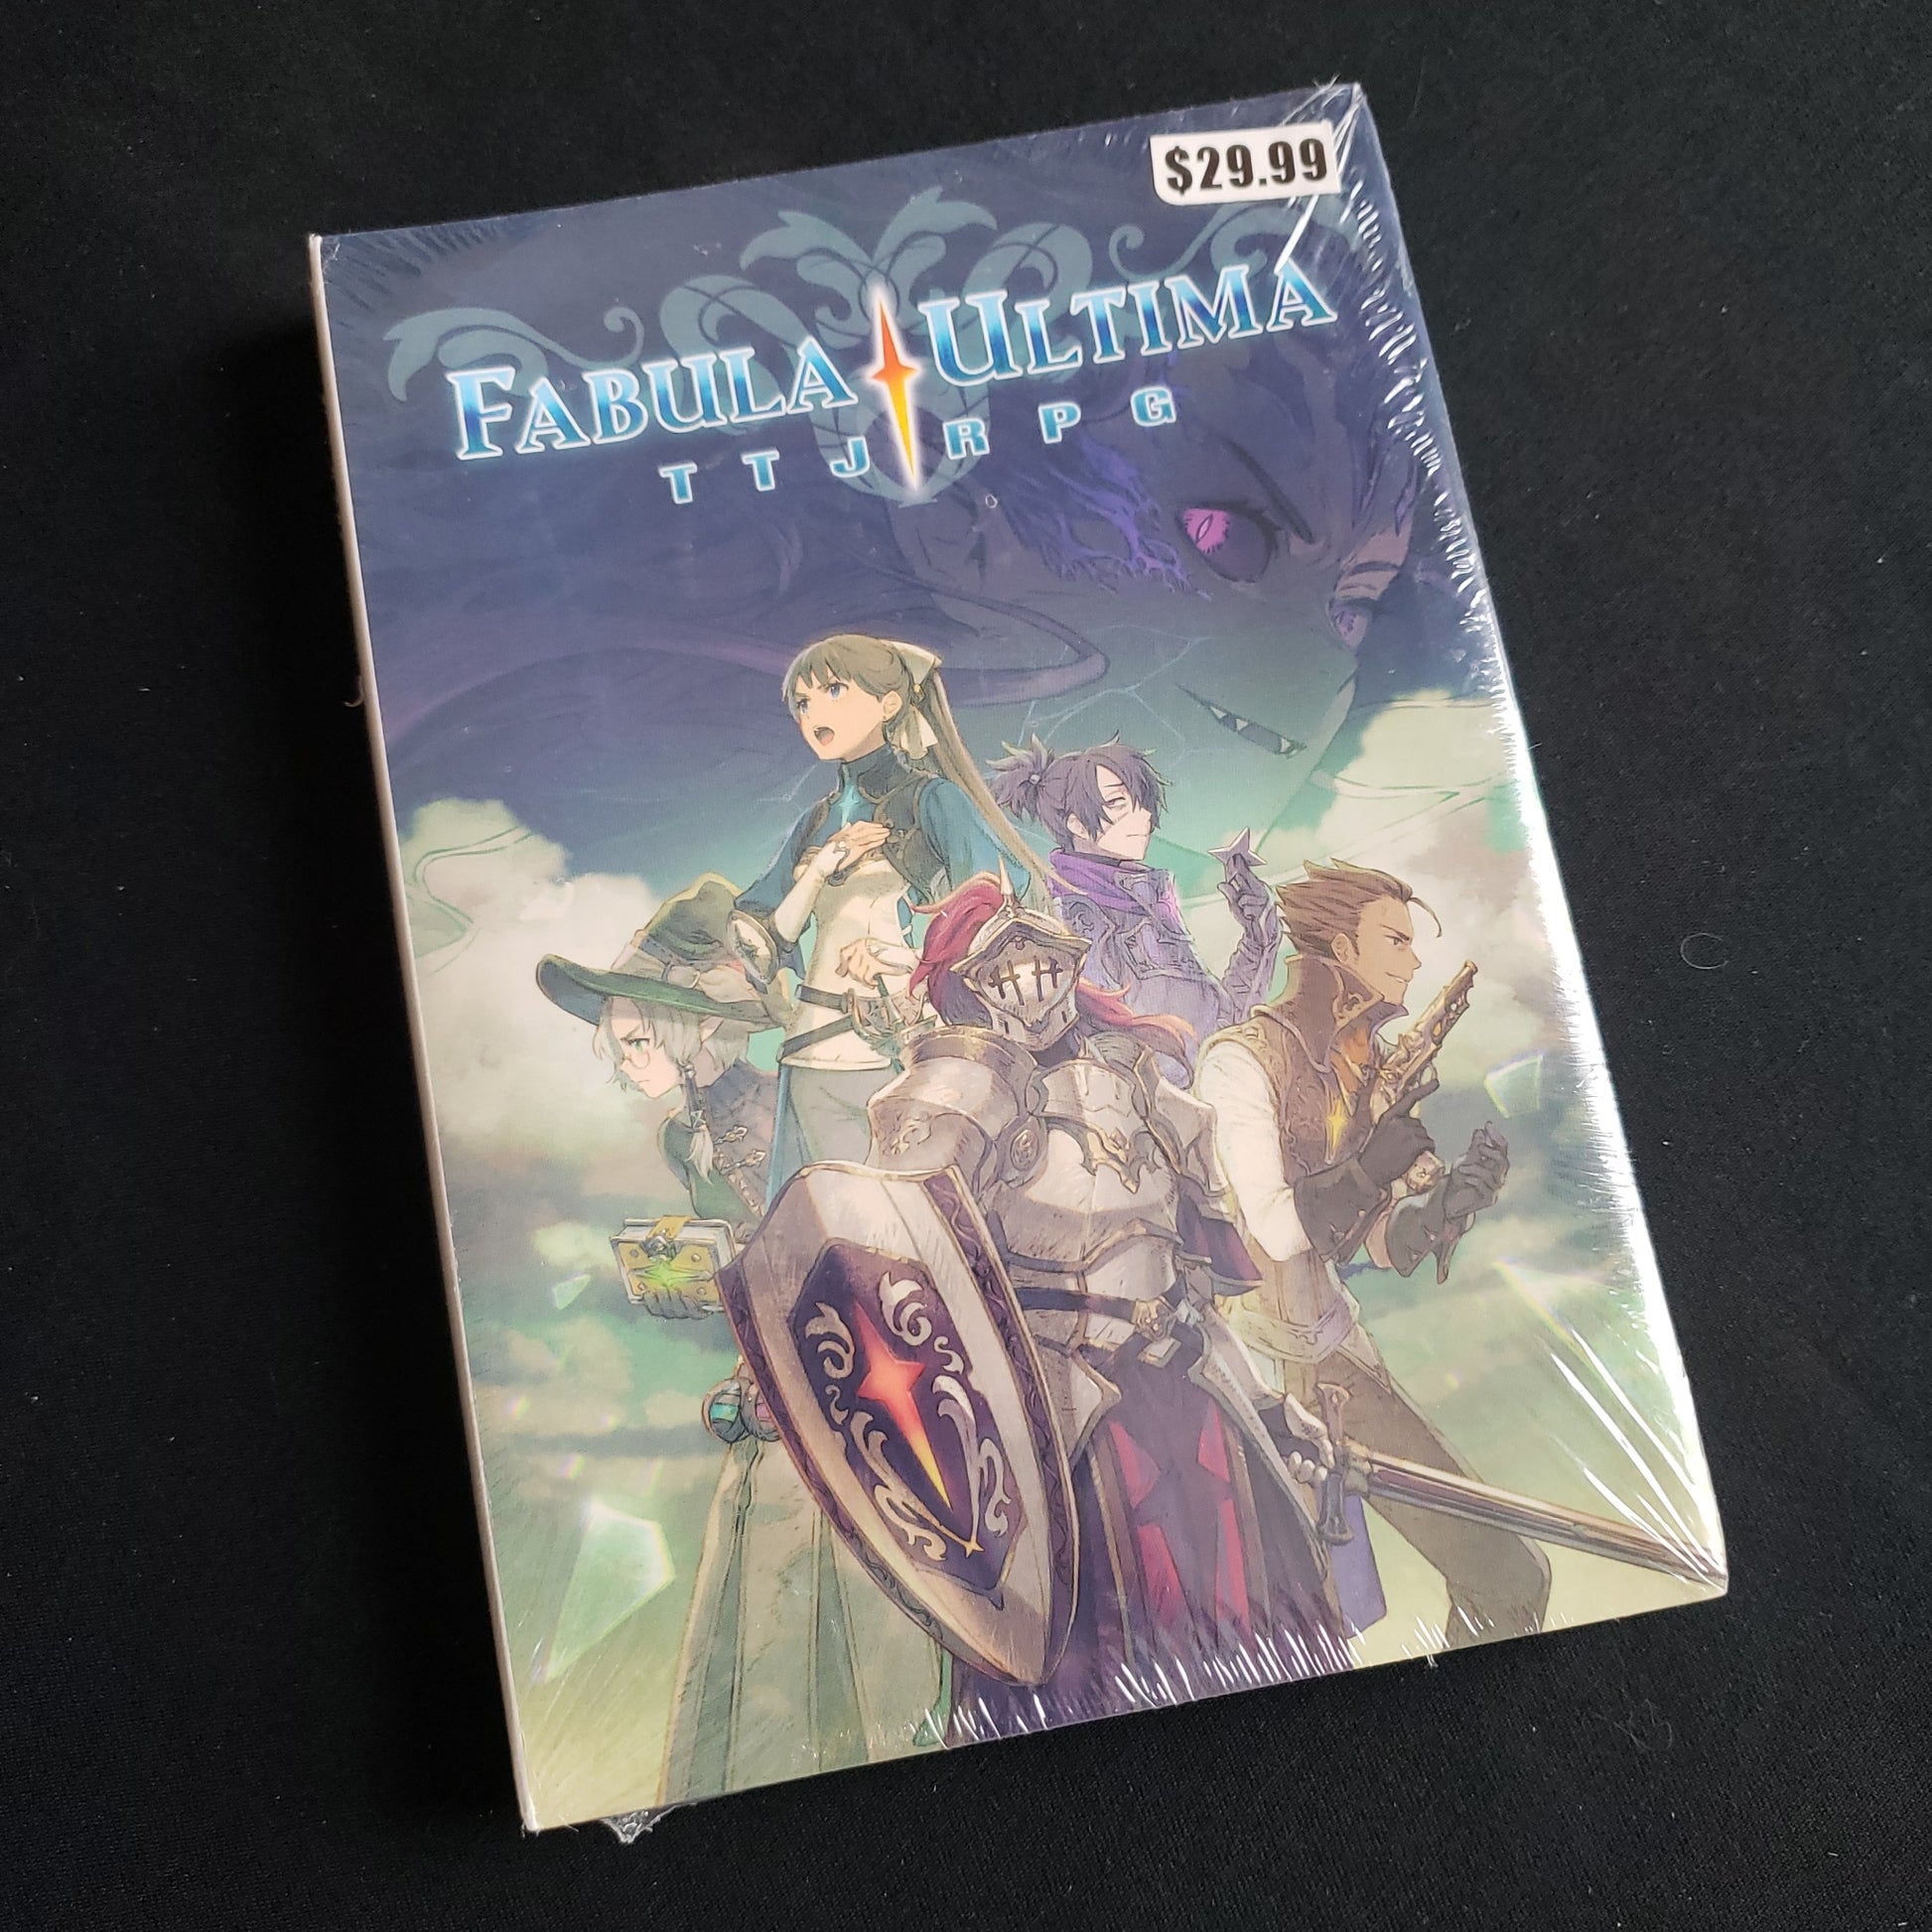 Image shows the front cover of the Fabula Ultima: Core Rules roleplaying game book